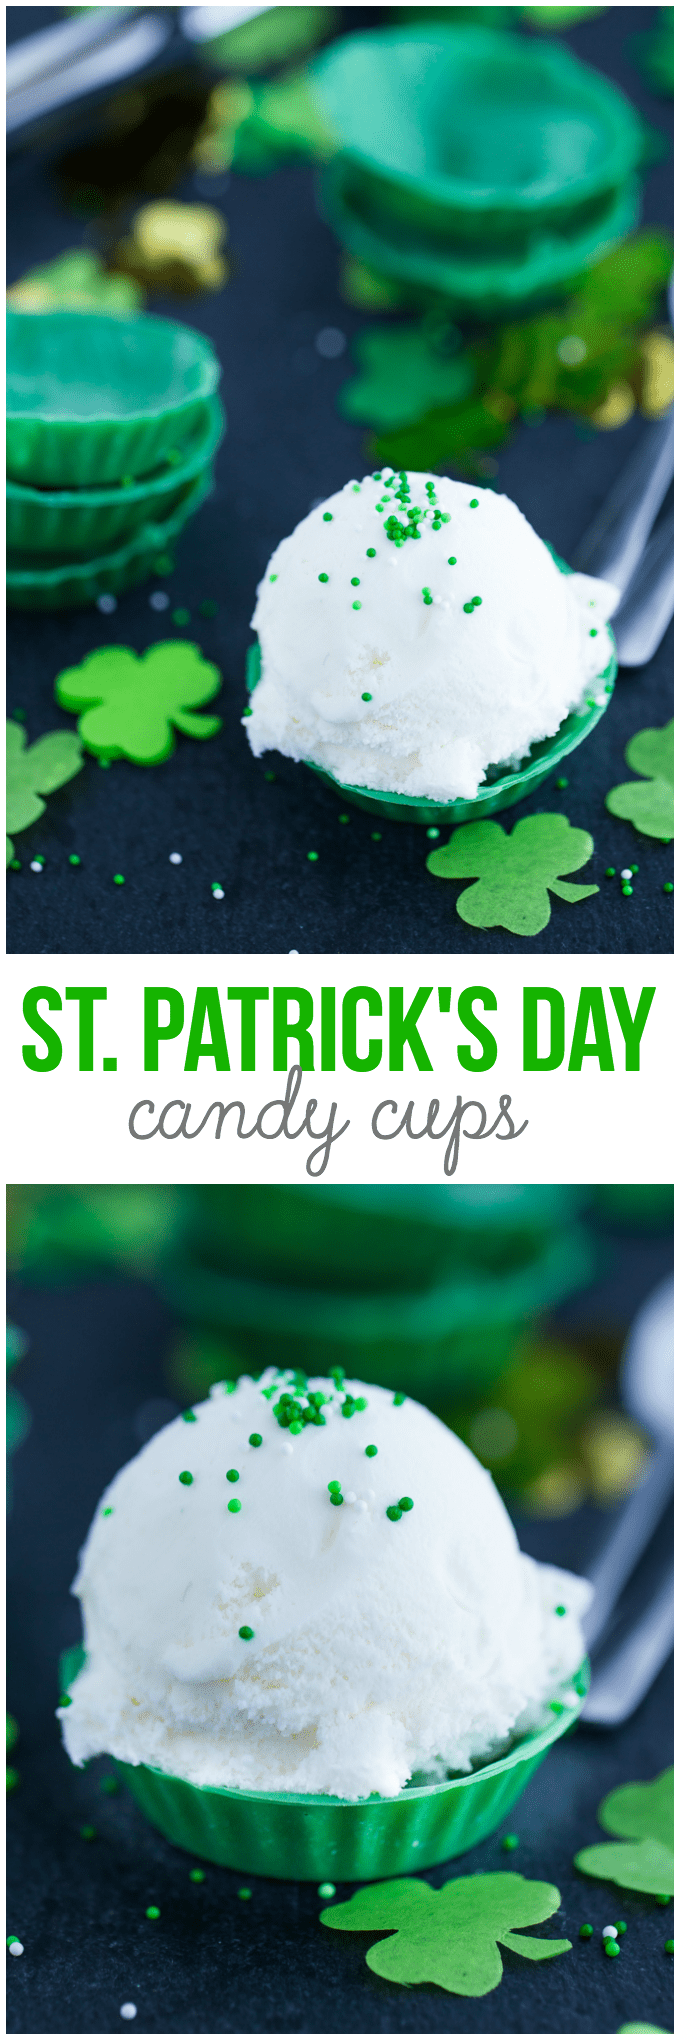 St. Patrick's Day Candy Cups - ONE ingredient! This recipe is super easy to make and fun to eat.